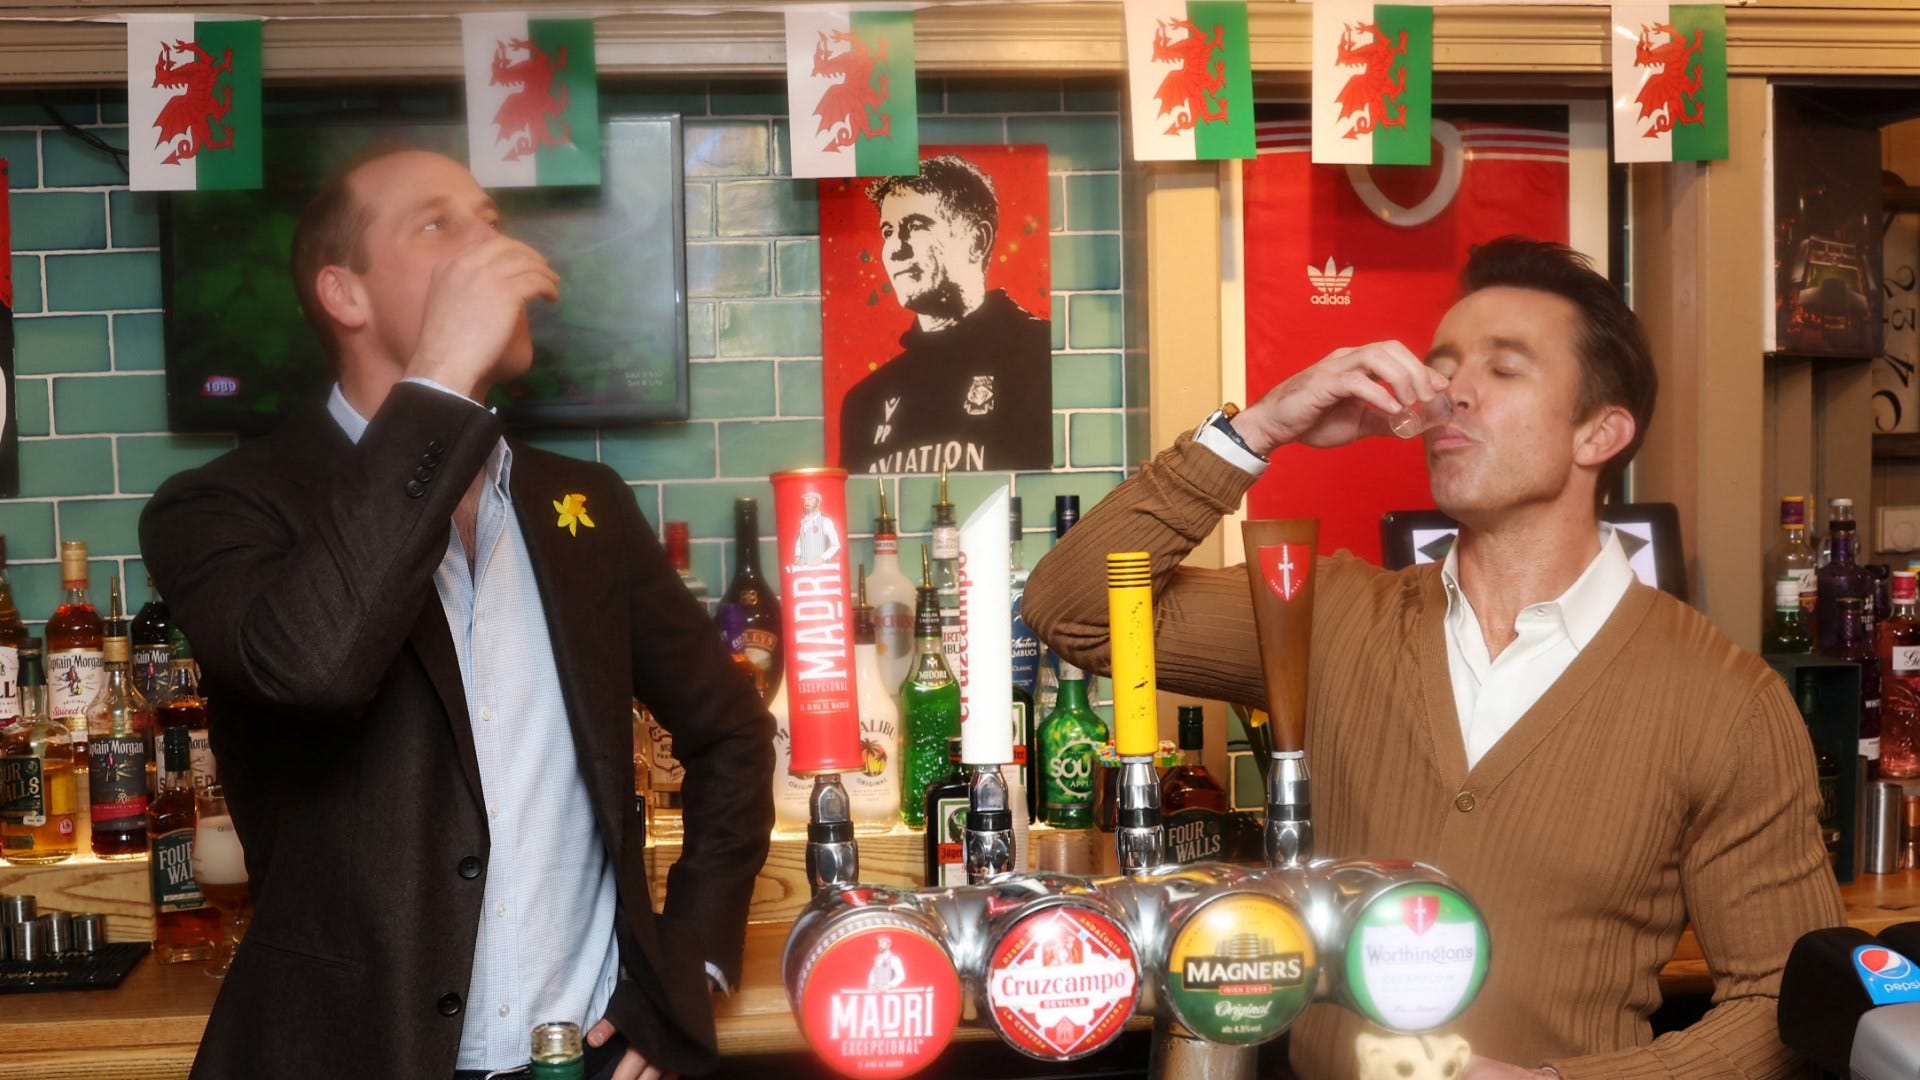 VIDEO: Shots with the future King of England! Wrexham co-owner Rob McElhenney downs whiskey with Prince William as pair pour pints at famous The Turf Pub